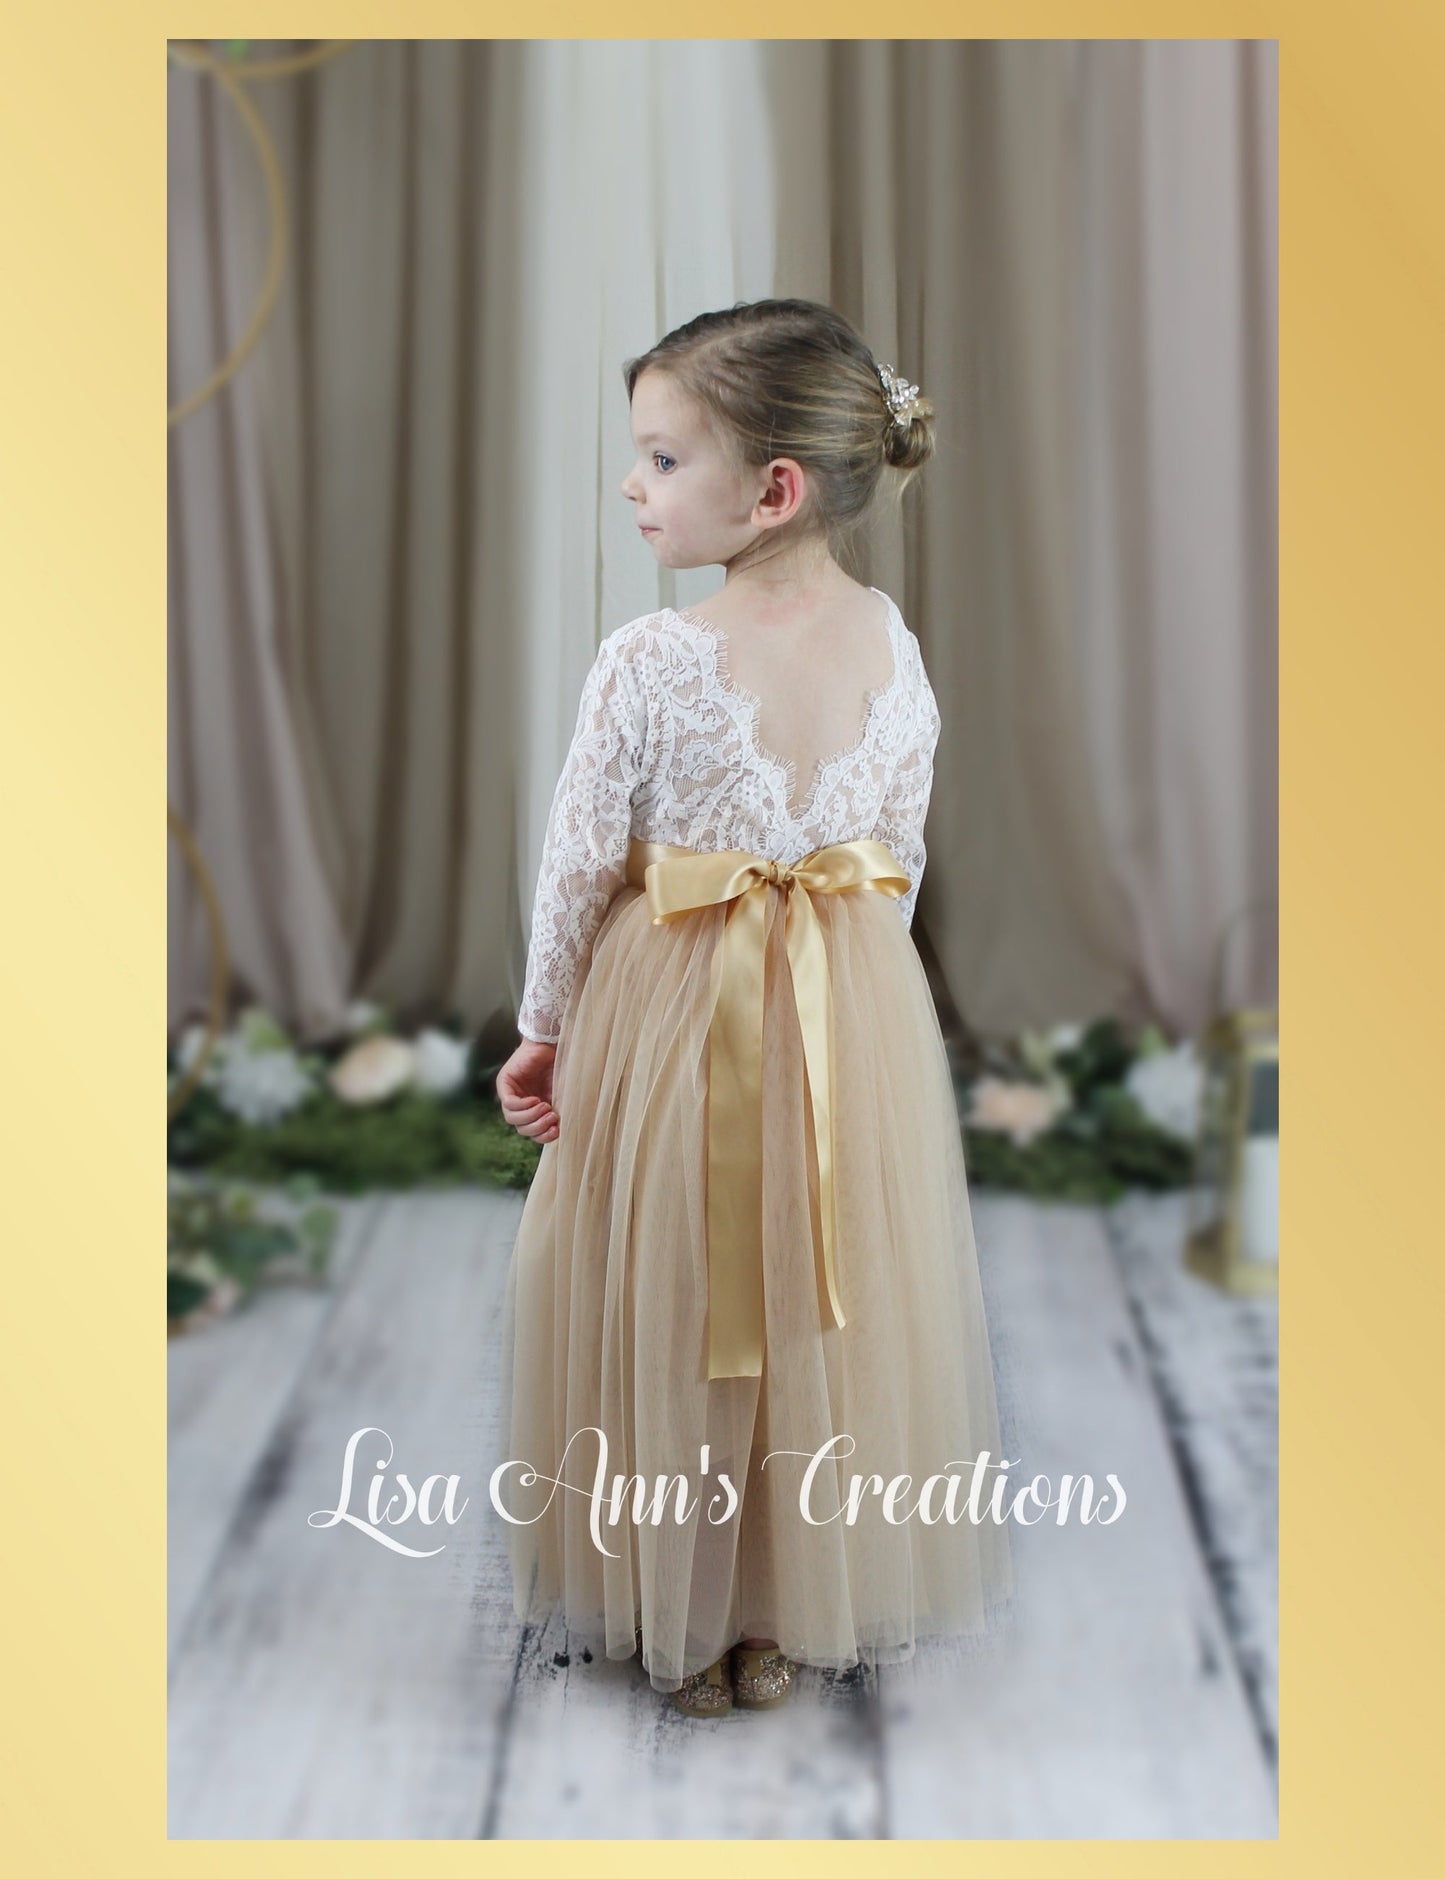 The Tulip - Long Sleeve - Champagne Dress